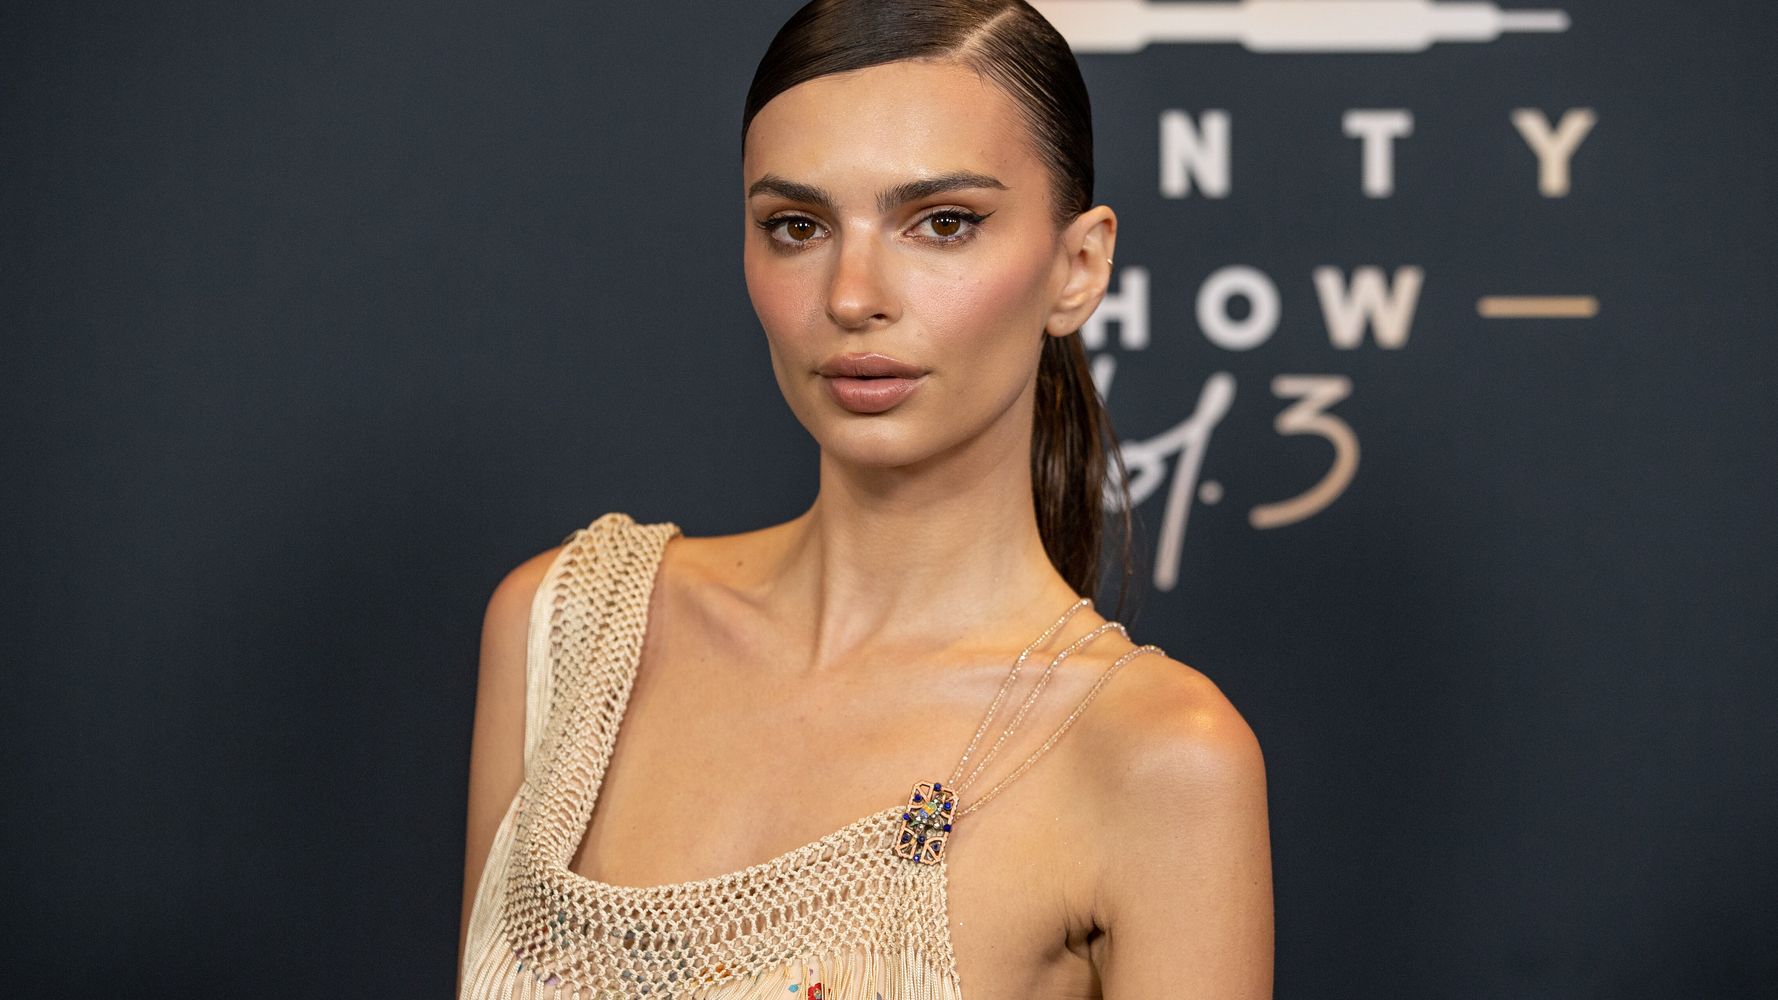 Emily Ratajkowski Says Robin Thicke Sexually Assaulted Her During 'Blurred Lines' Shoot